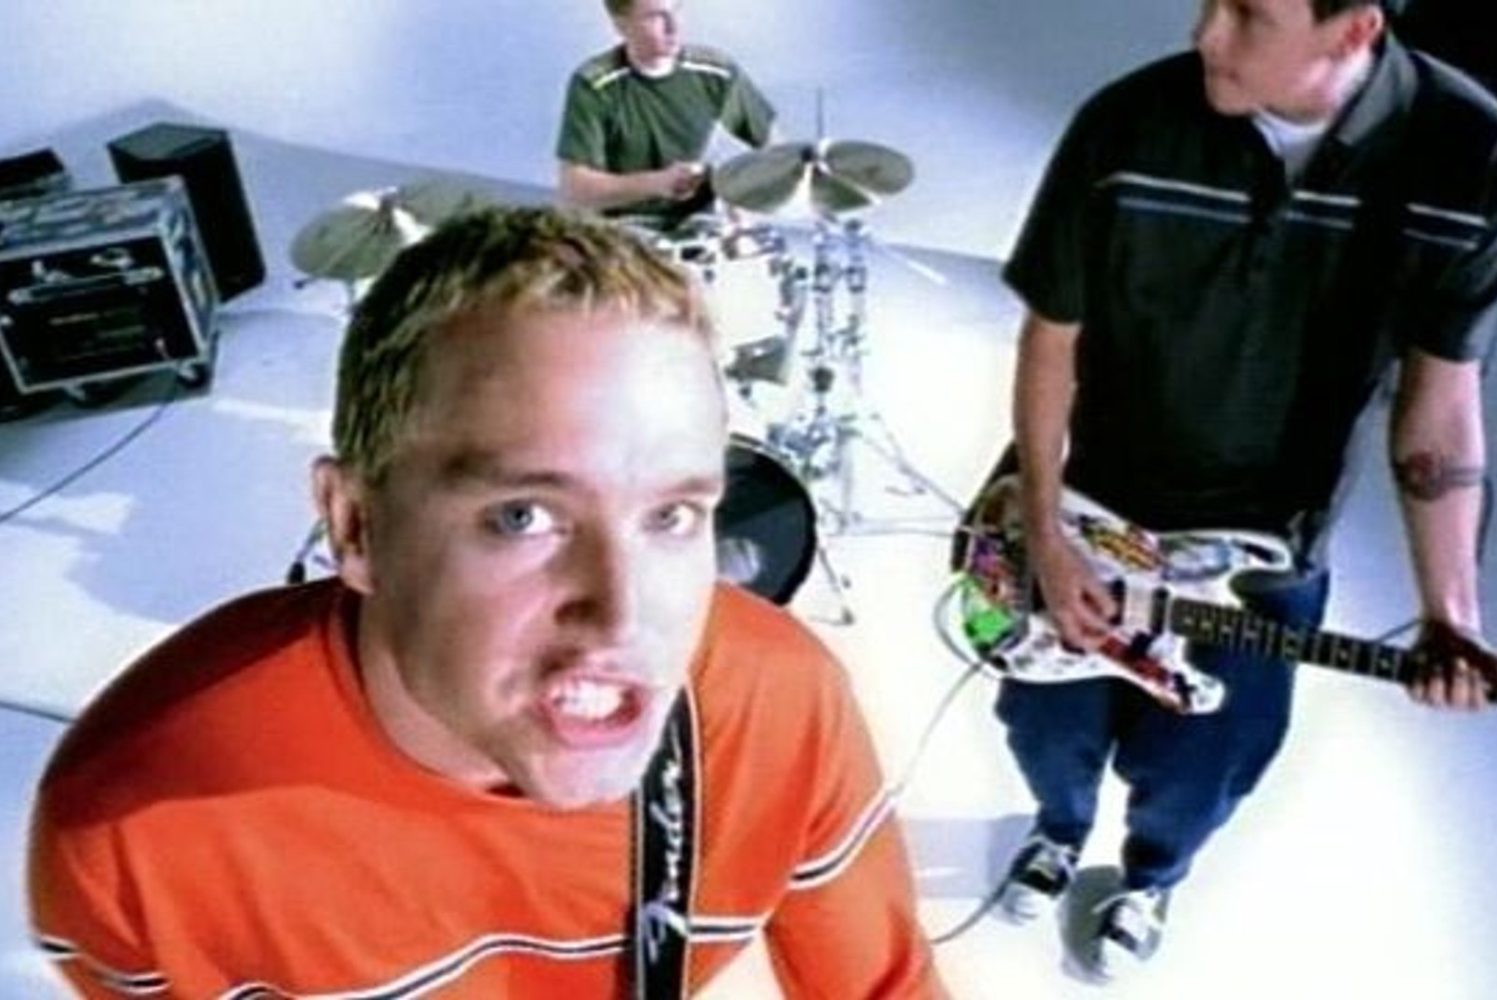 blink-182 from music video